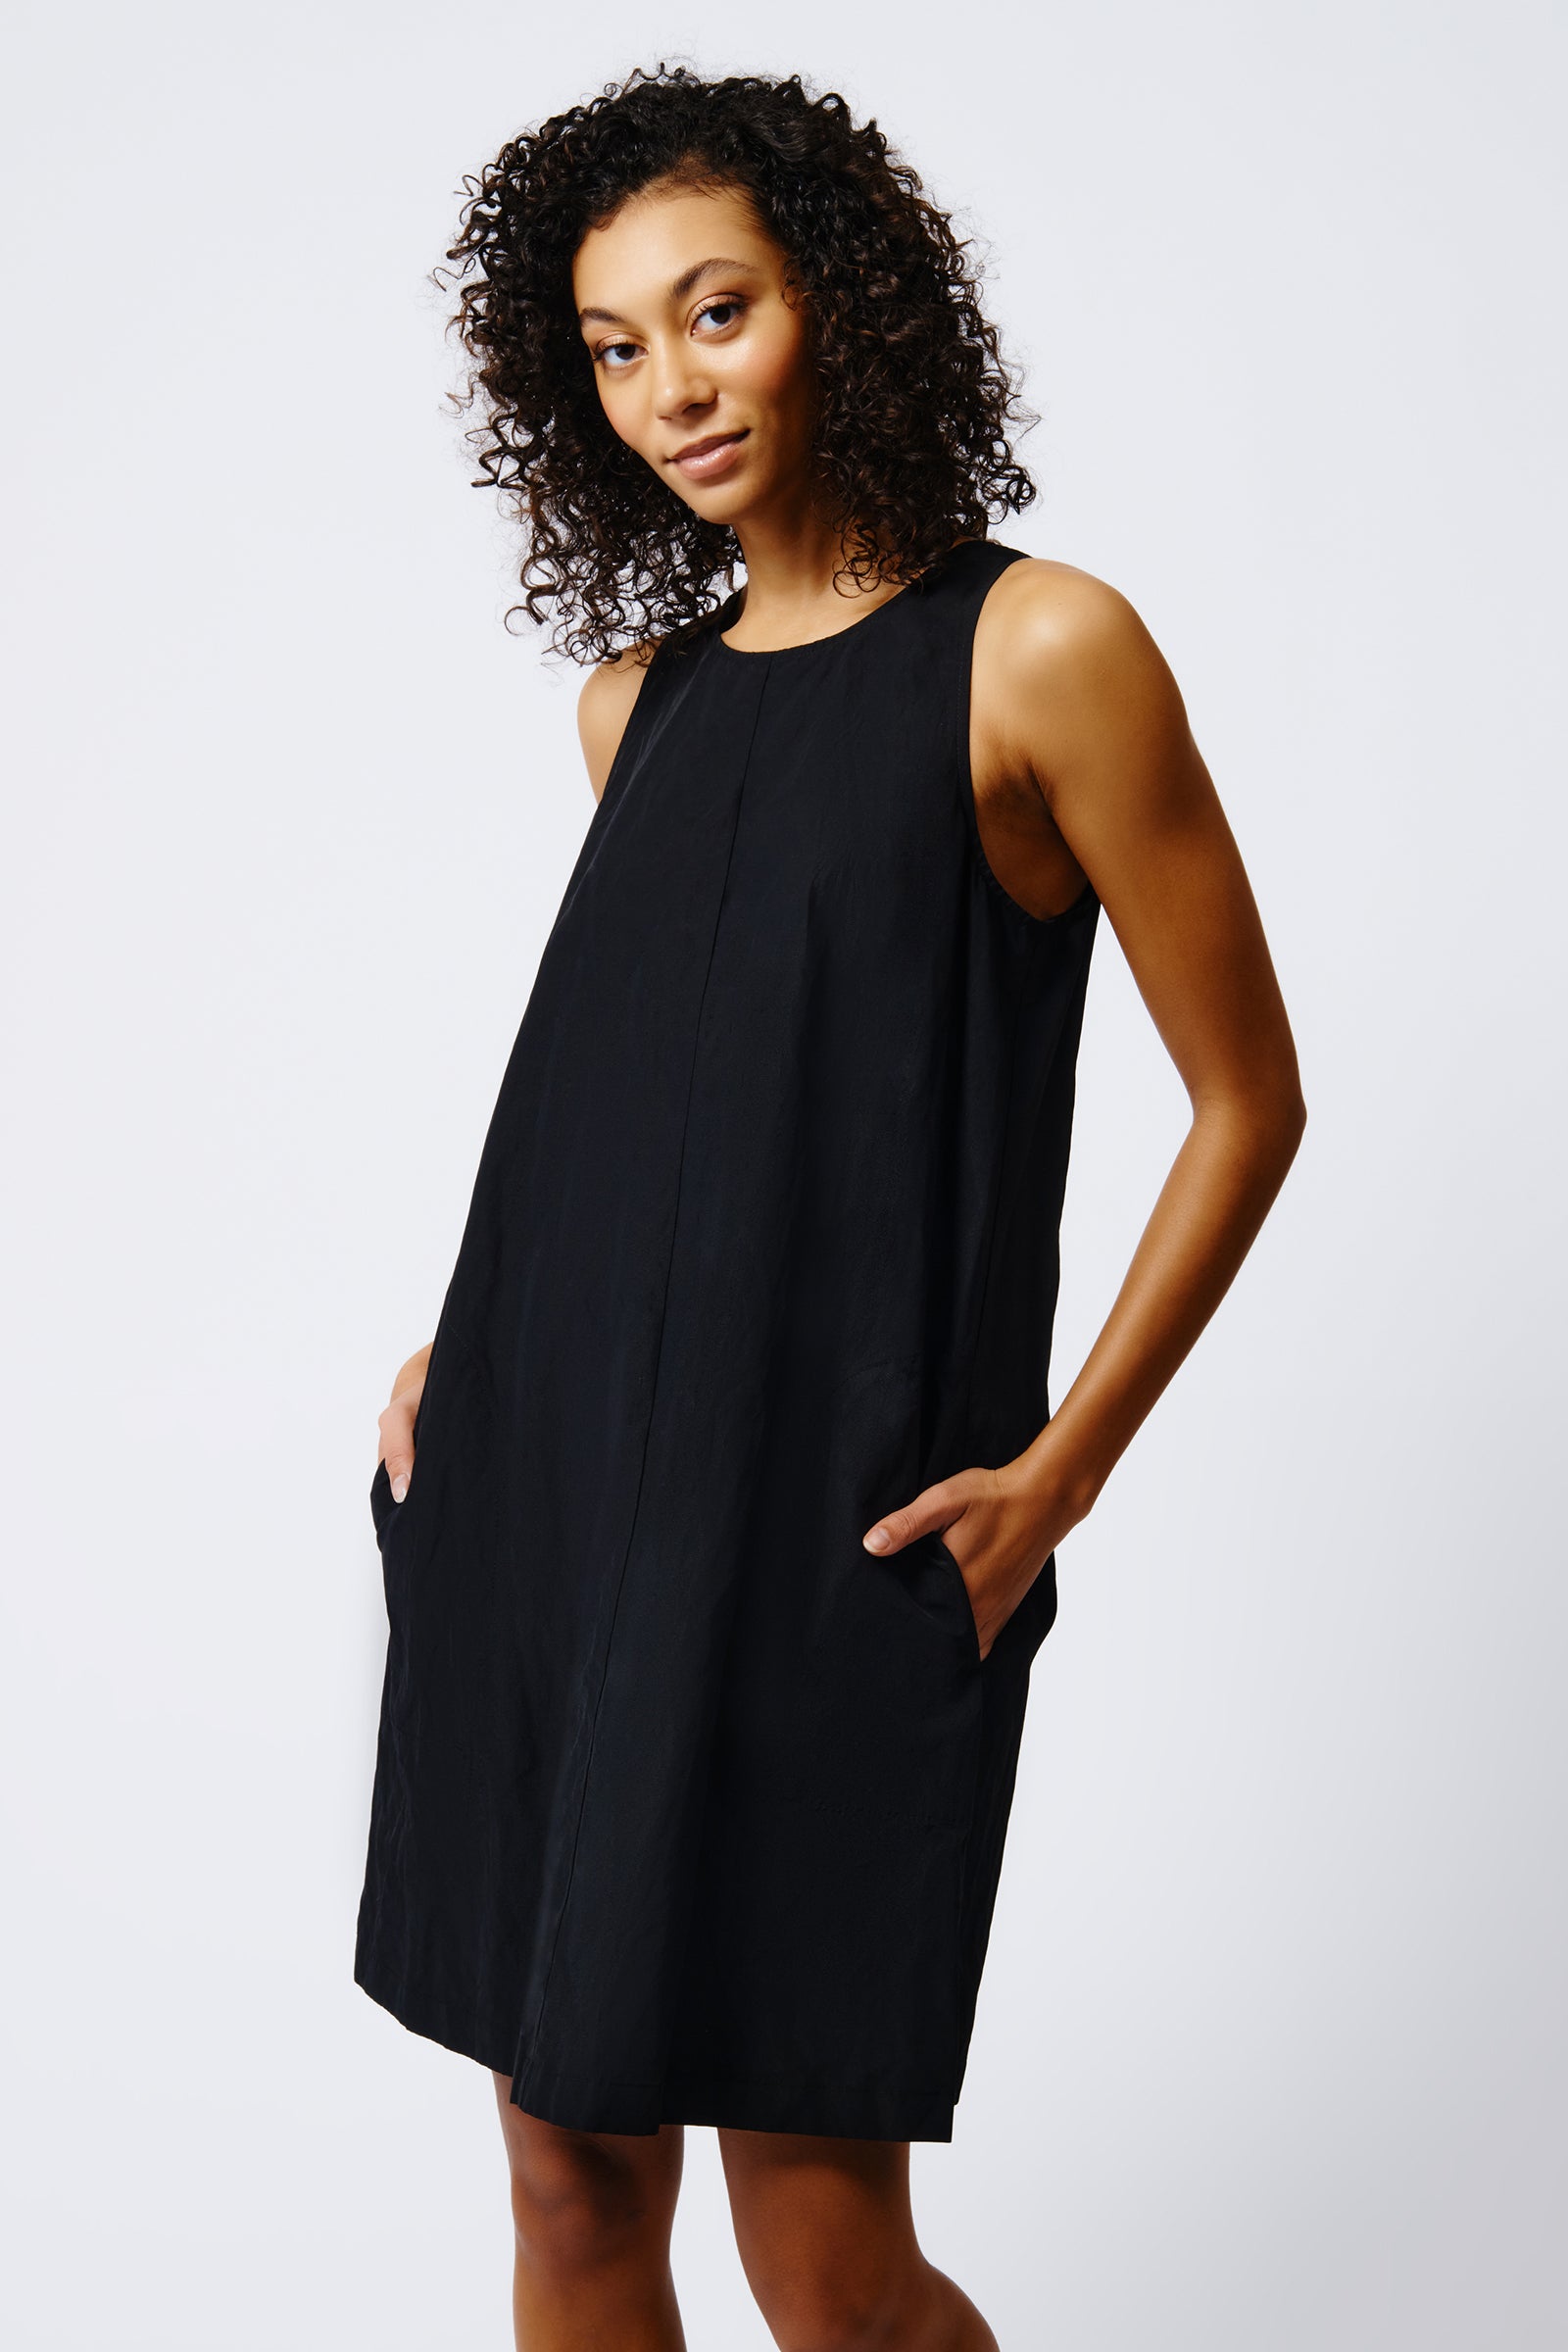 Trapeze Dress in Black with A-Line Silhouette – KAL RIEMAN